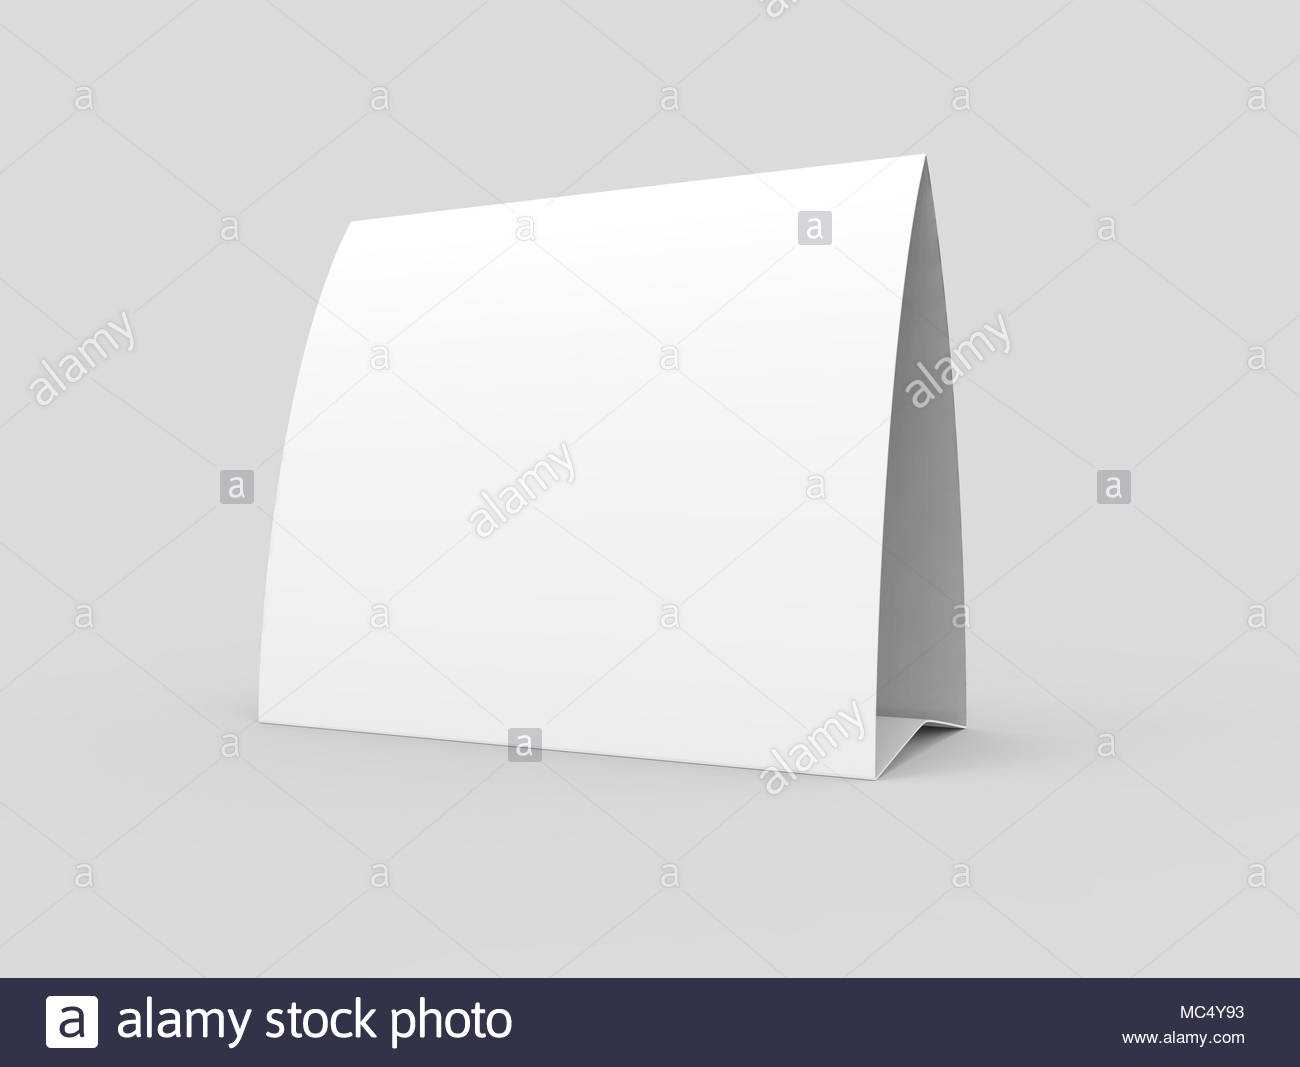 Blank Paper Tent Template, White Tent Card With Empty Space Throughout Blank Tent Card Template